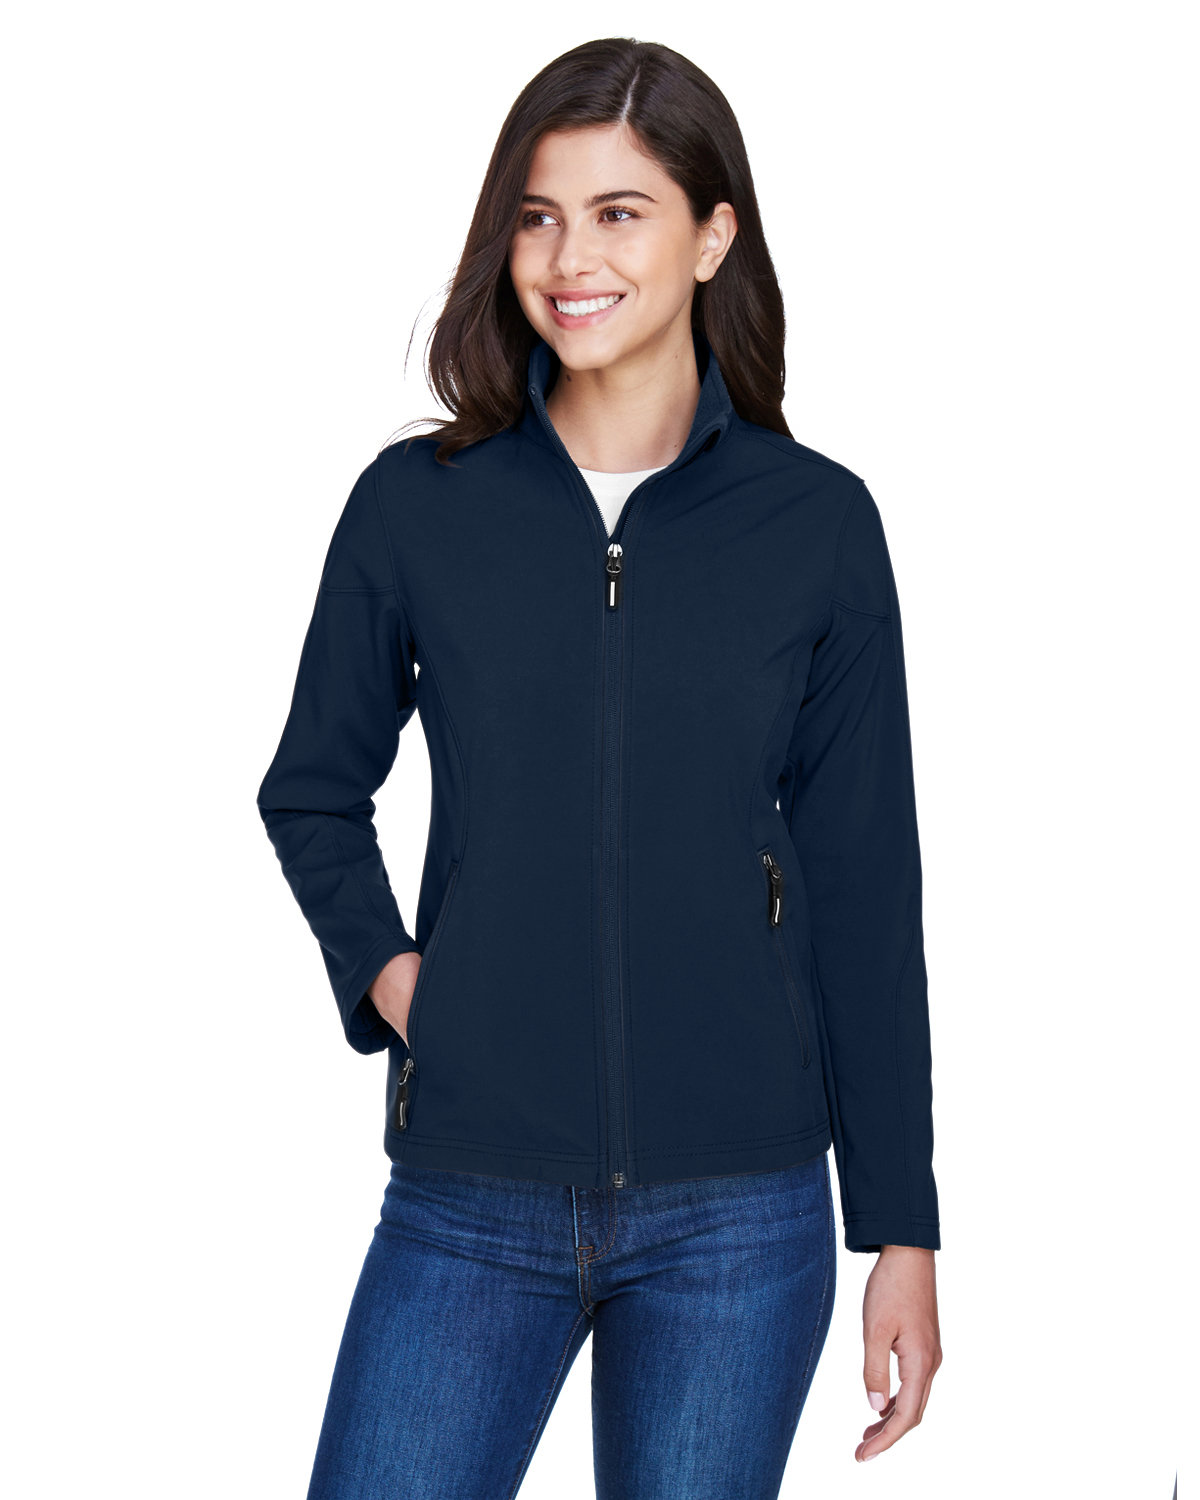 Core 365 Ladies' Cruise Two-Layer Fleece Bonded Soft Shell Jacket CLASSIC NAVY 